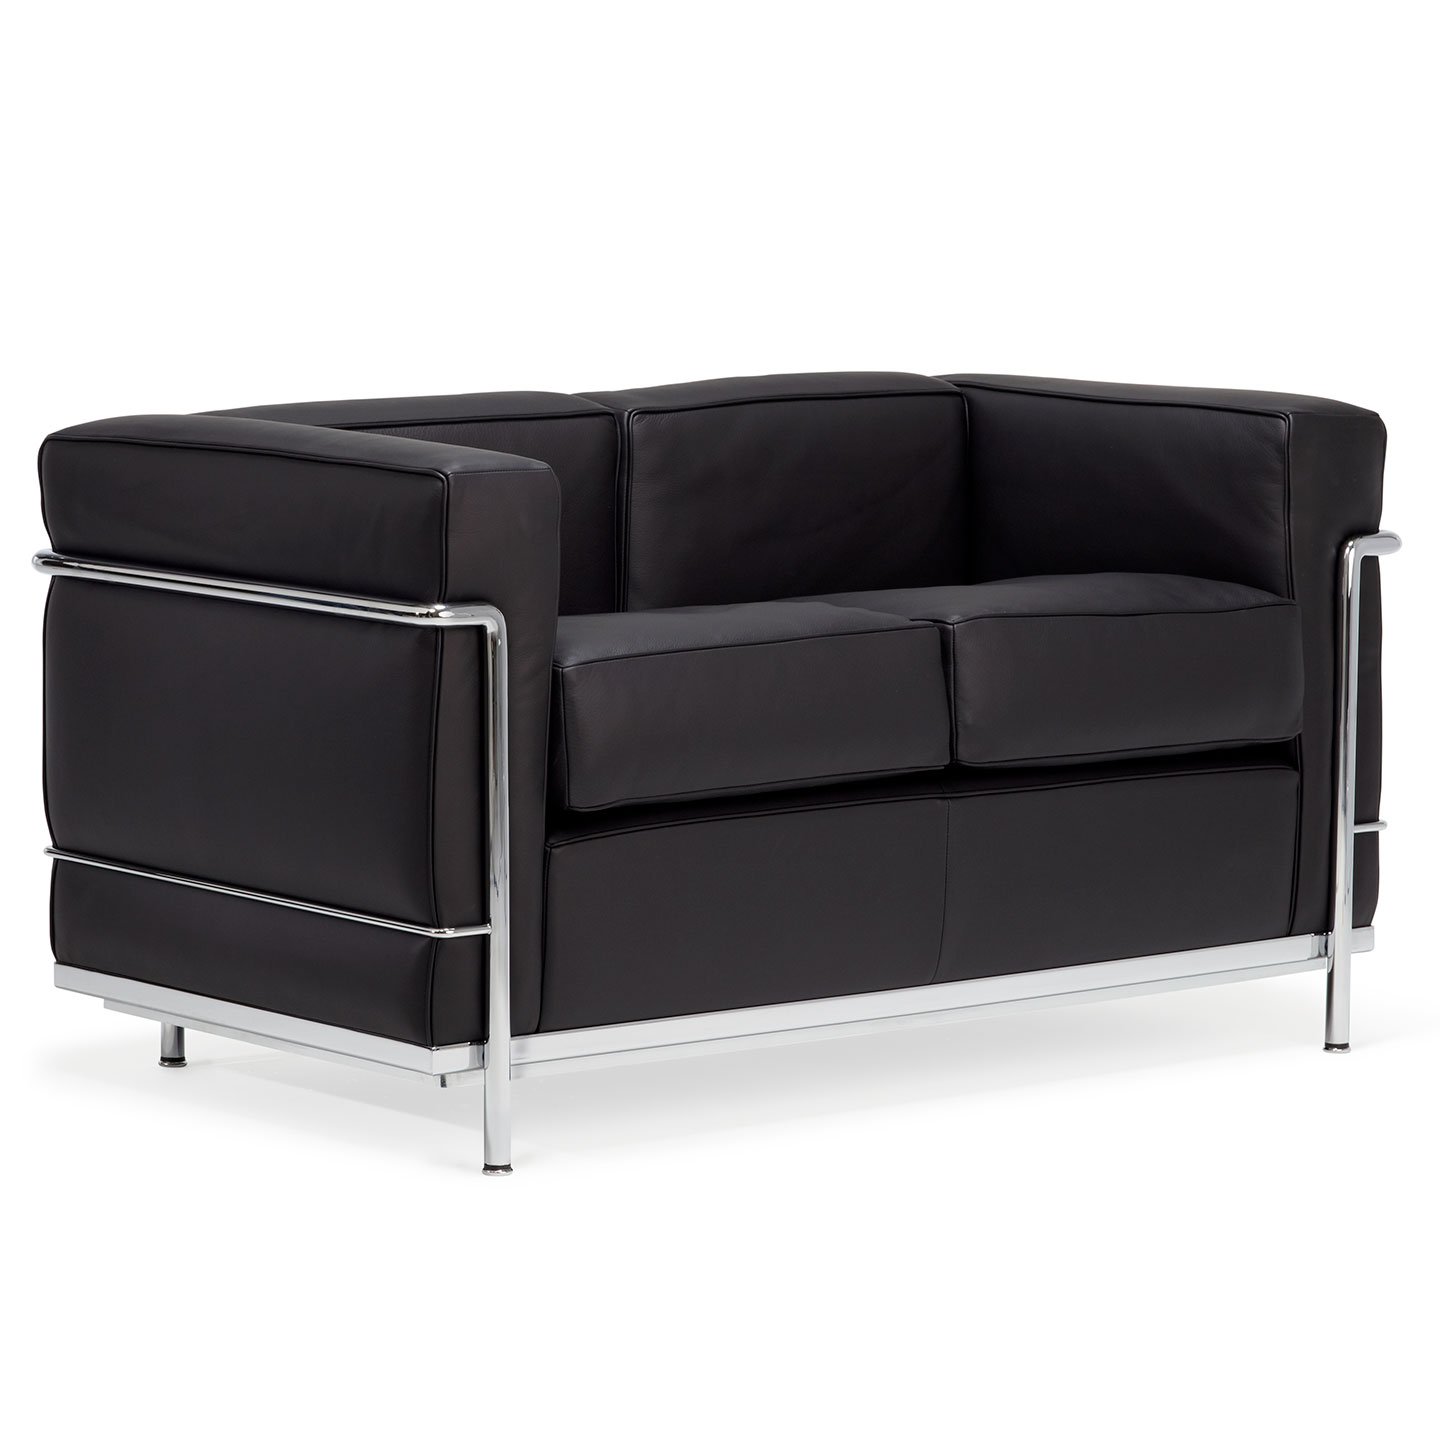 Haworth LC 2 lounge two seater sofa in black leather